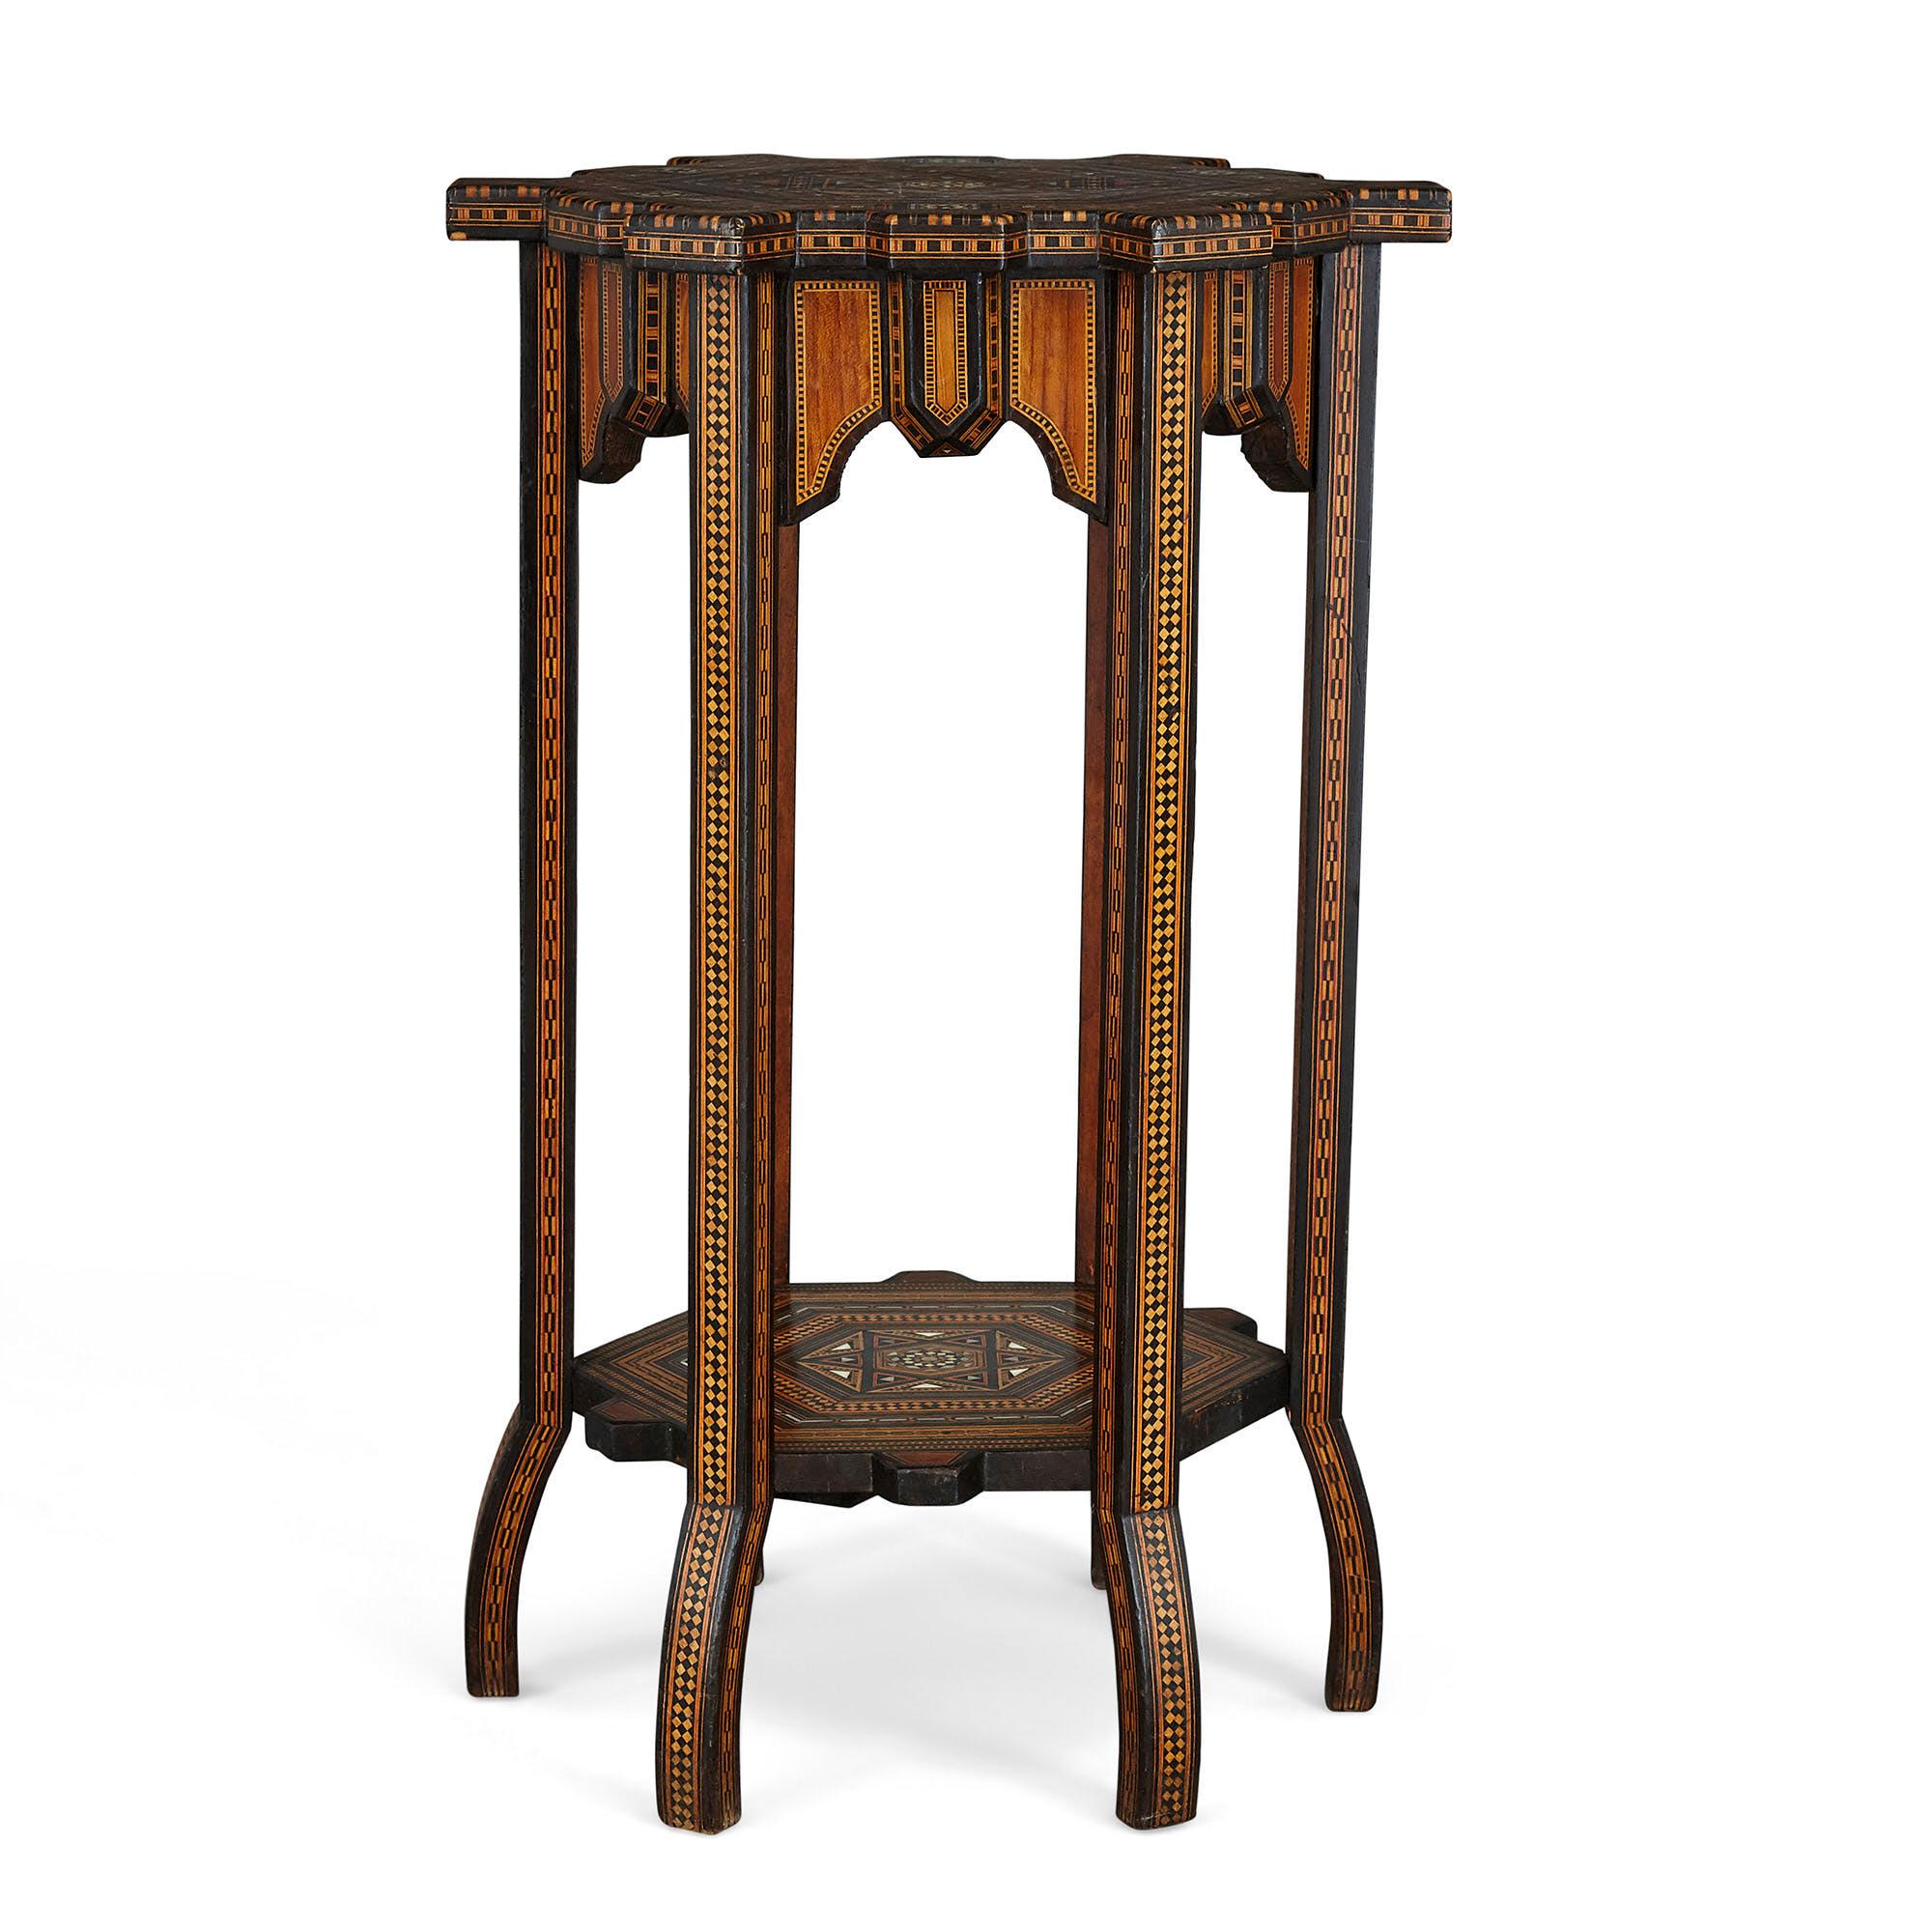 Antique traditional Syrian geometrical marquetry side table
Syrian, late 19th century
Measures: Height 68cm, width 39cm, depth 42cm

This beautiful side table is a fine demonstration of the intricacy of traditional Syrian design. The table